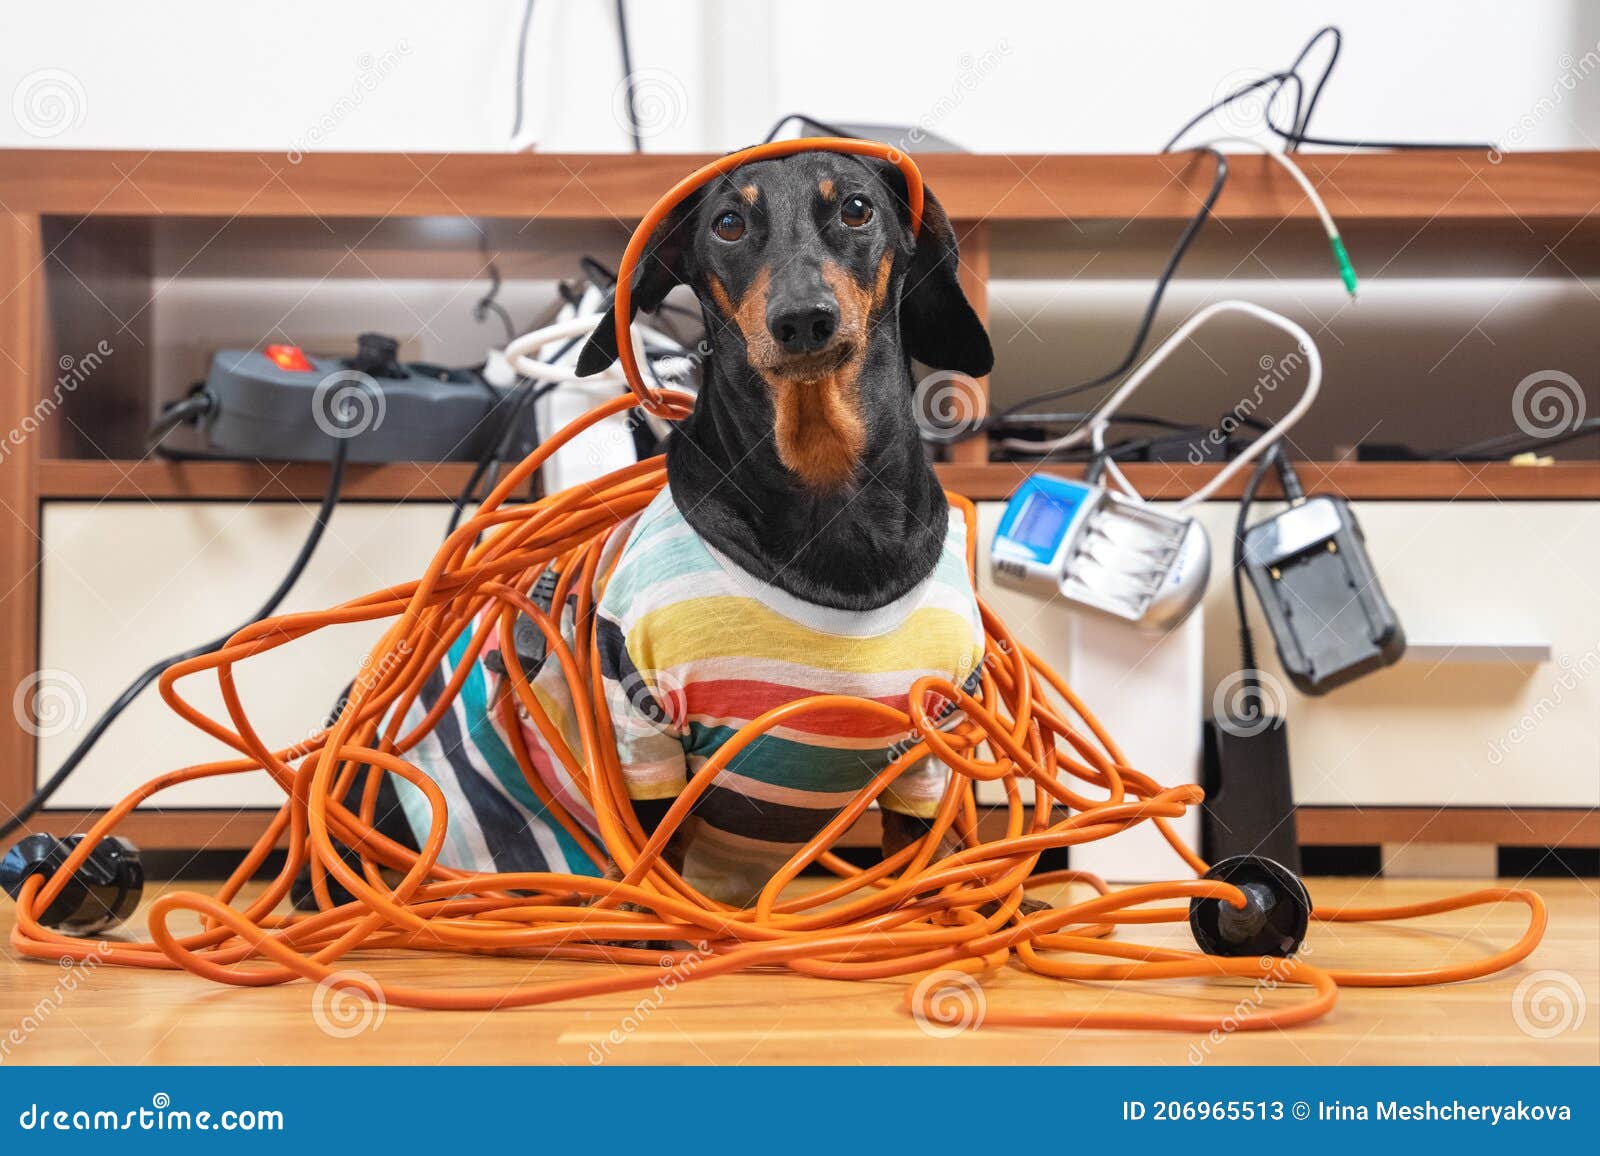 naughty dachshund was left at home alone and made a mess. dog in striped t-shirt scattered and tore apart wires and